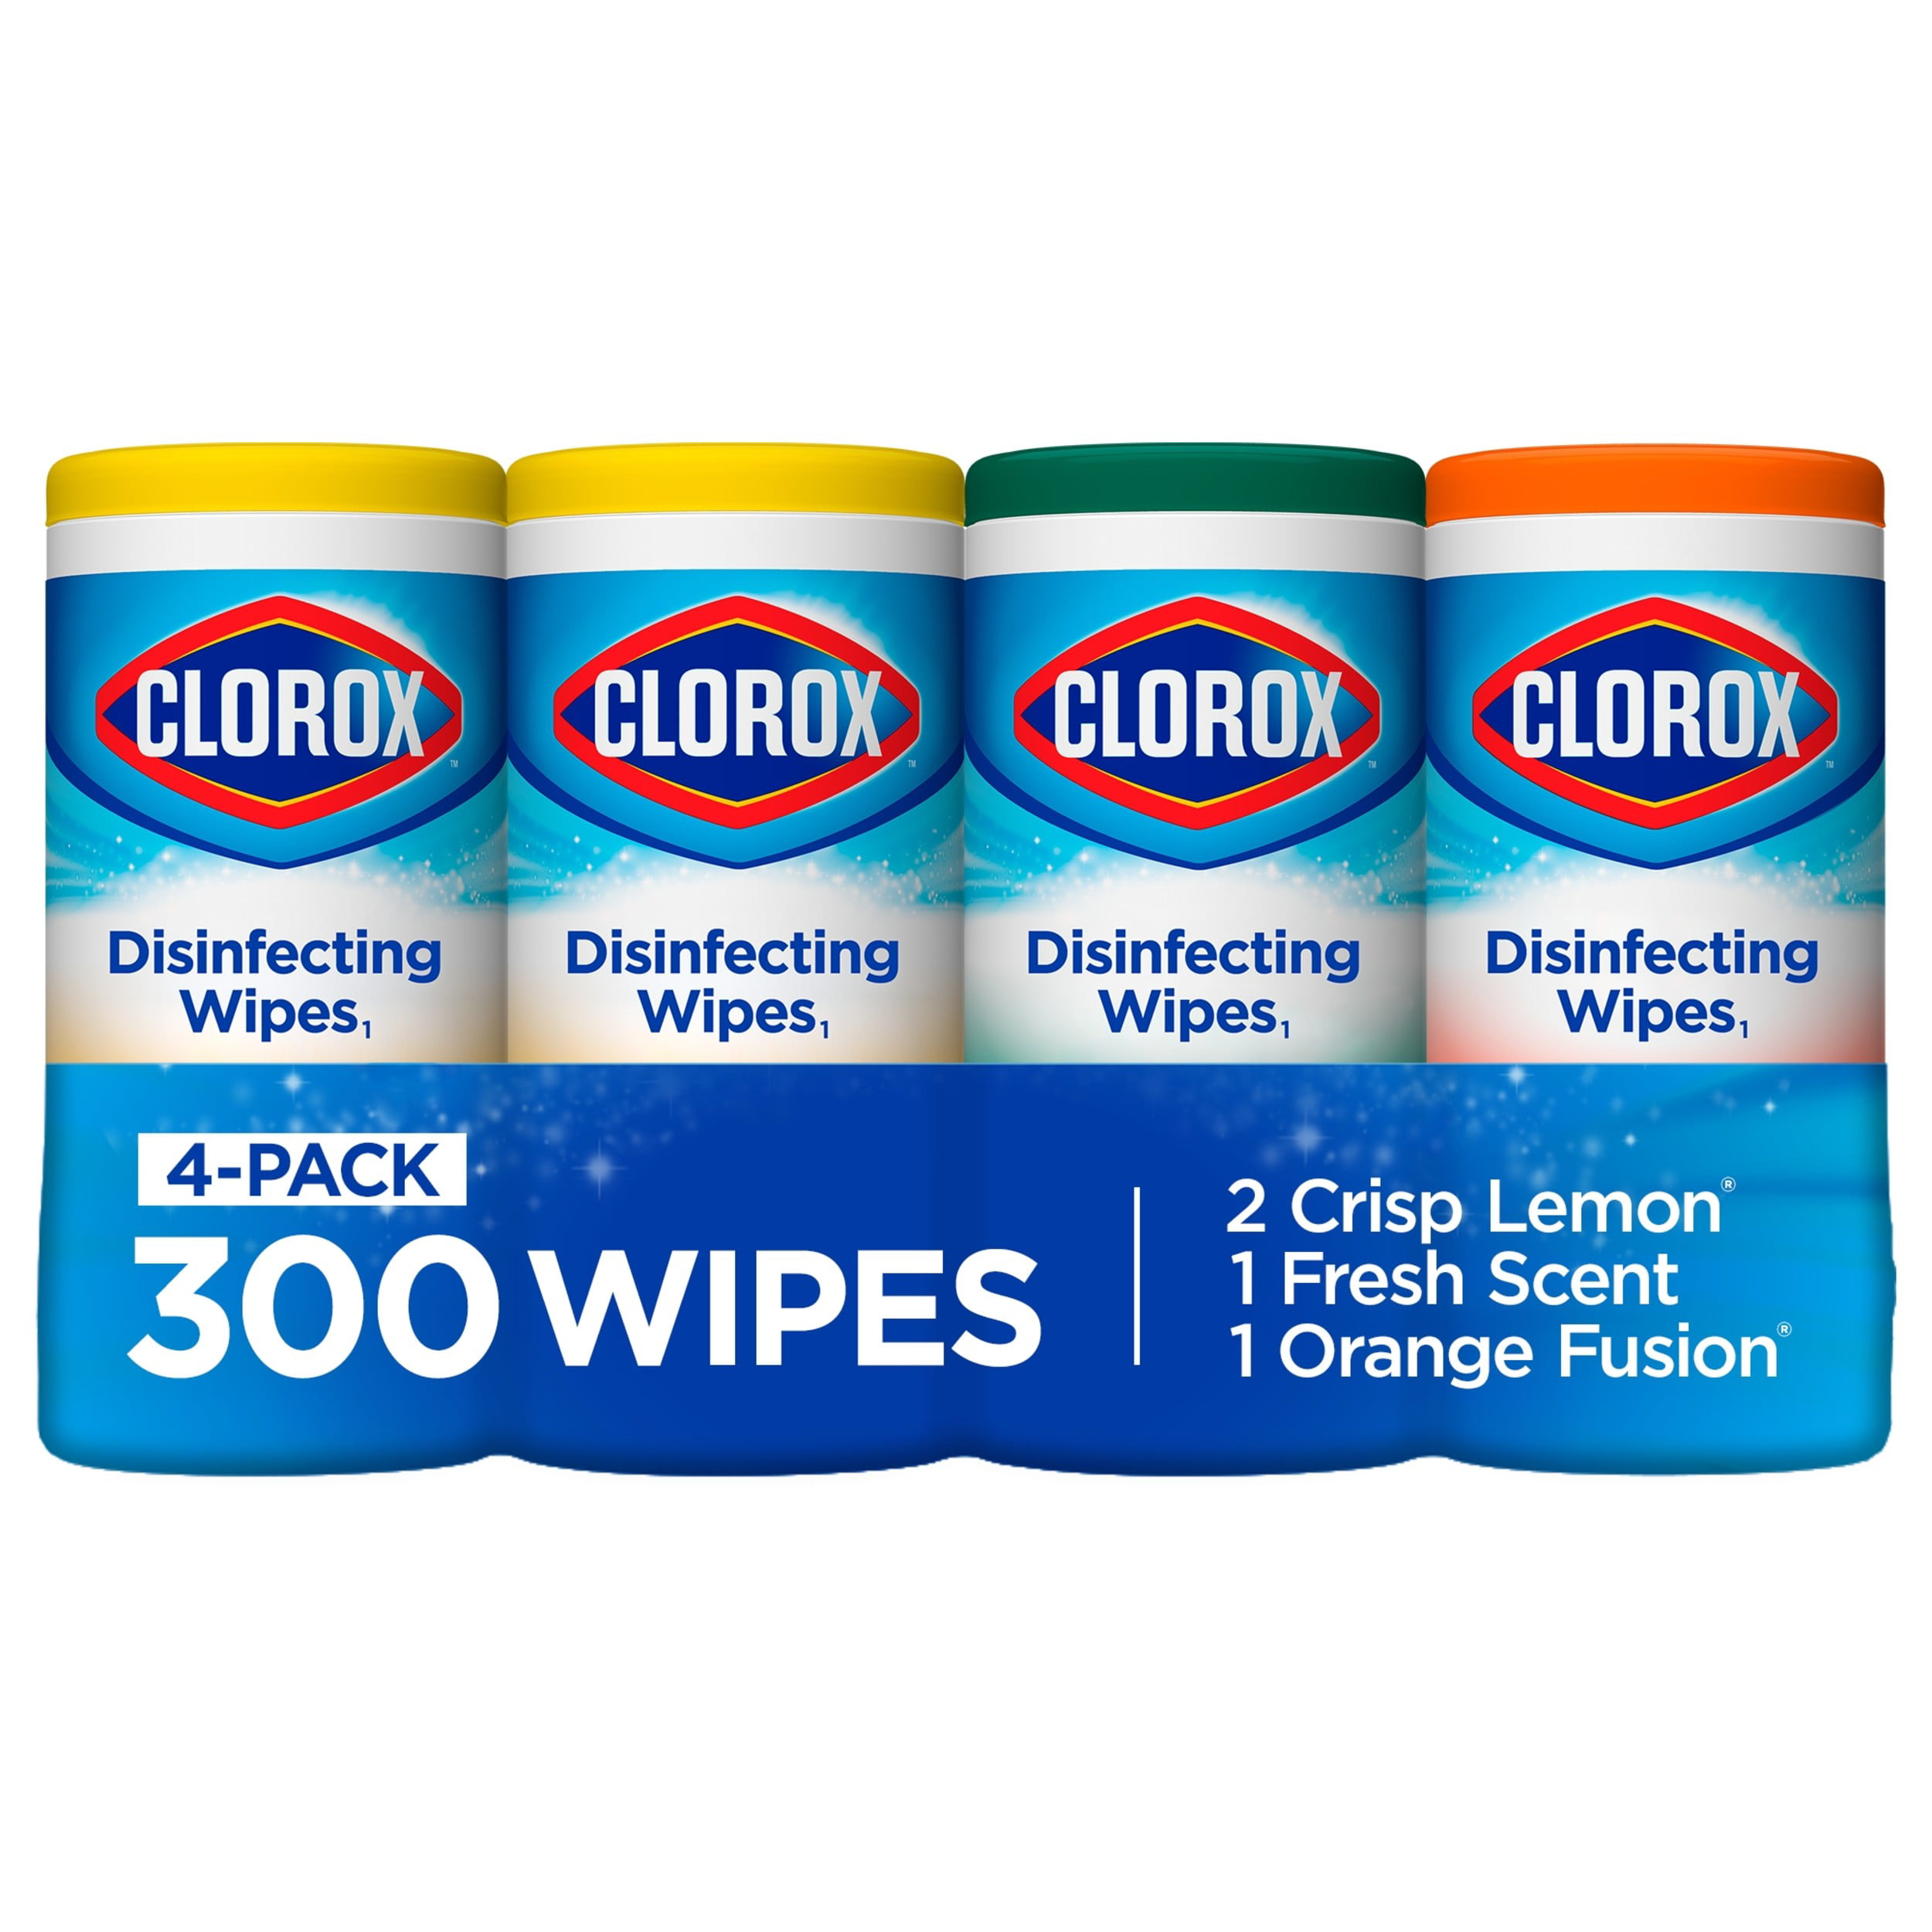 Clorox Disinfecting Wipes 300 Count Value Pack Bleach Free Cleaning Wipes 4 Pack 75 Count Each Walmart Com Walmart Com